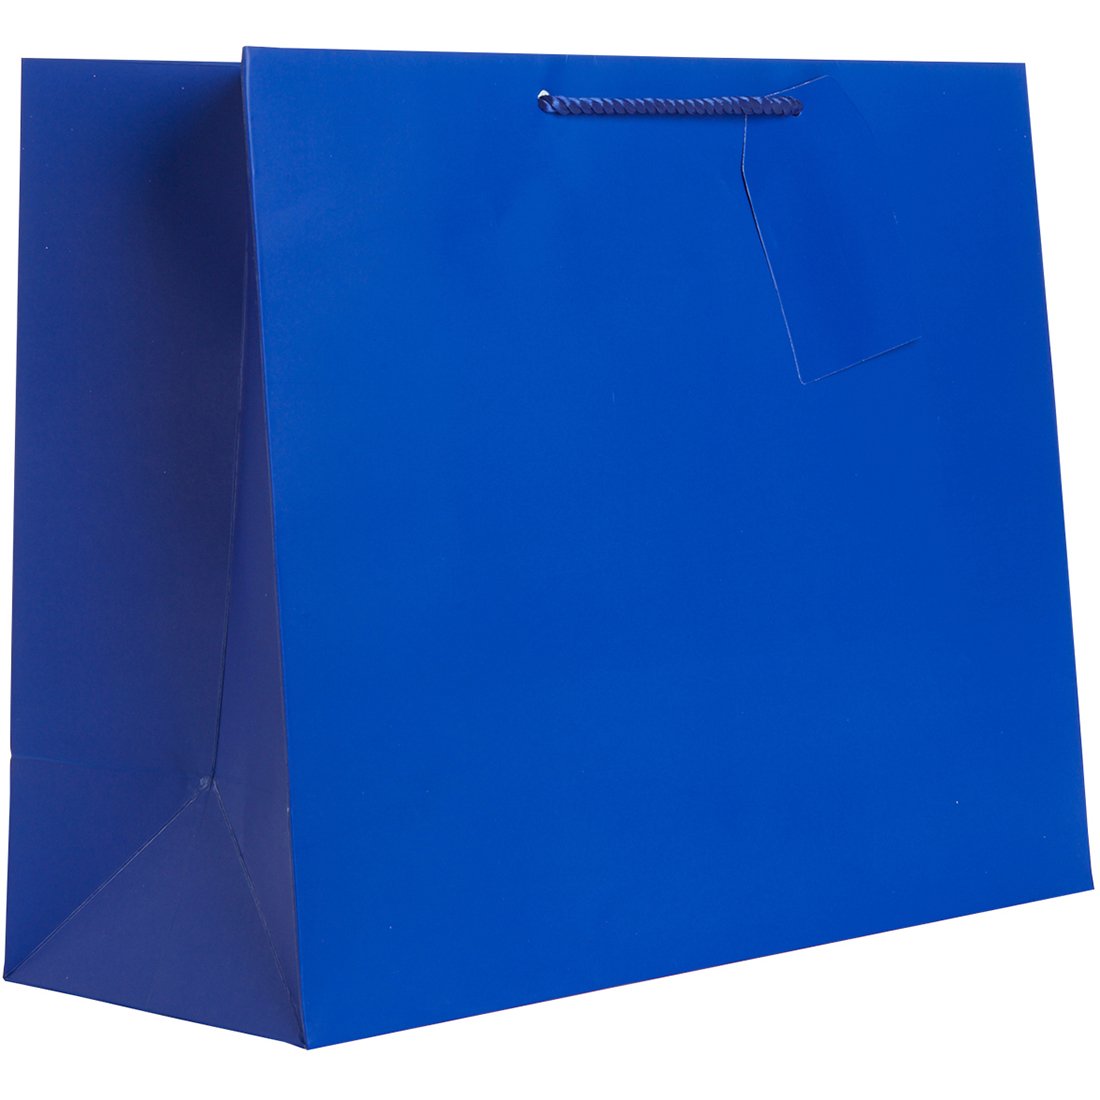 Heavyweight Solid Color Large Jumbo Gift Bags, Matte Royal Blue